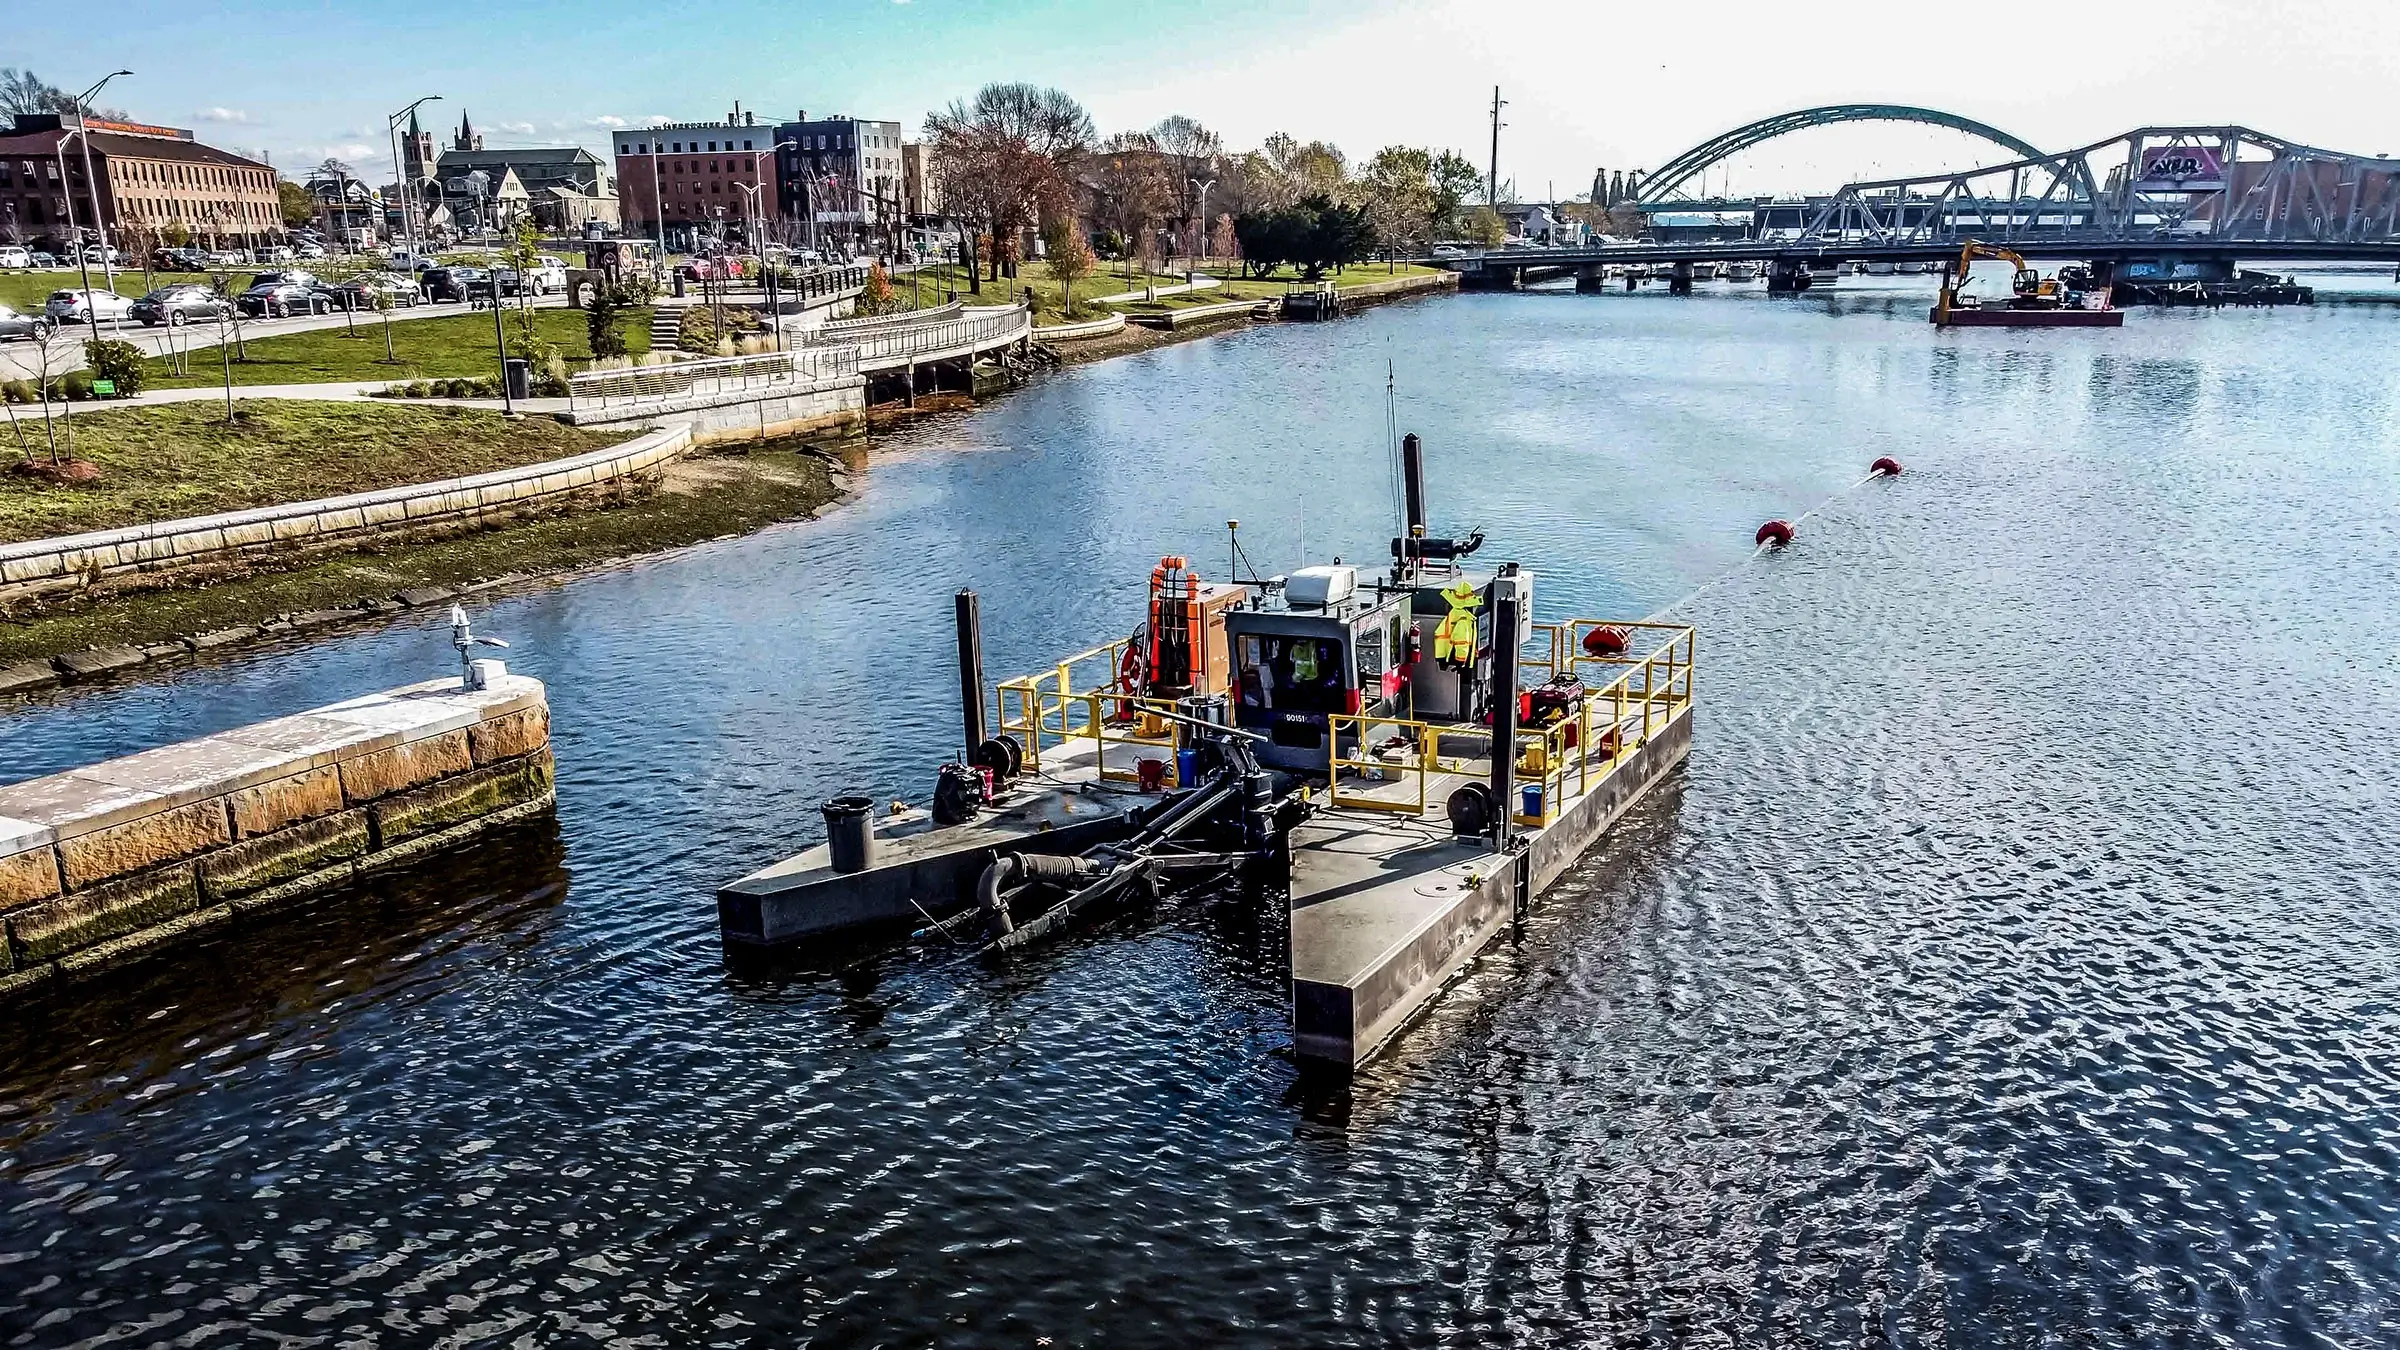 A dredging vessel operates on a city riverway